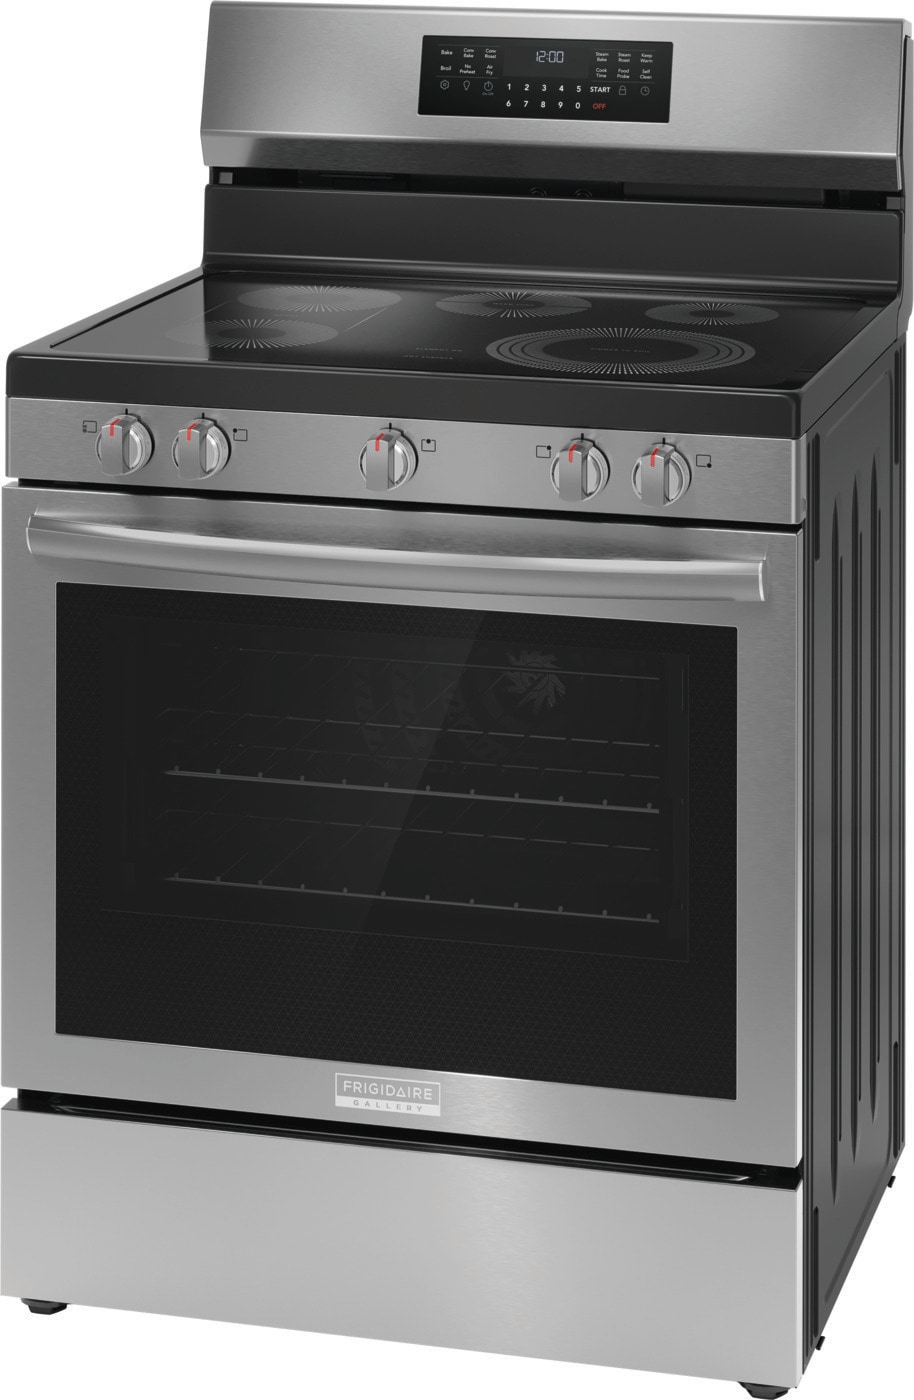 Frigidaire Gallery&nbsp;30" Electric Range with No Preheat + Air Fry - image 4 of 10